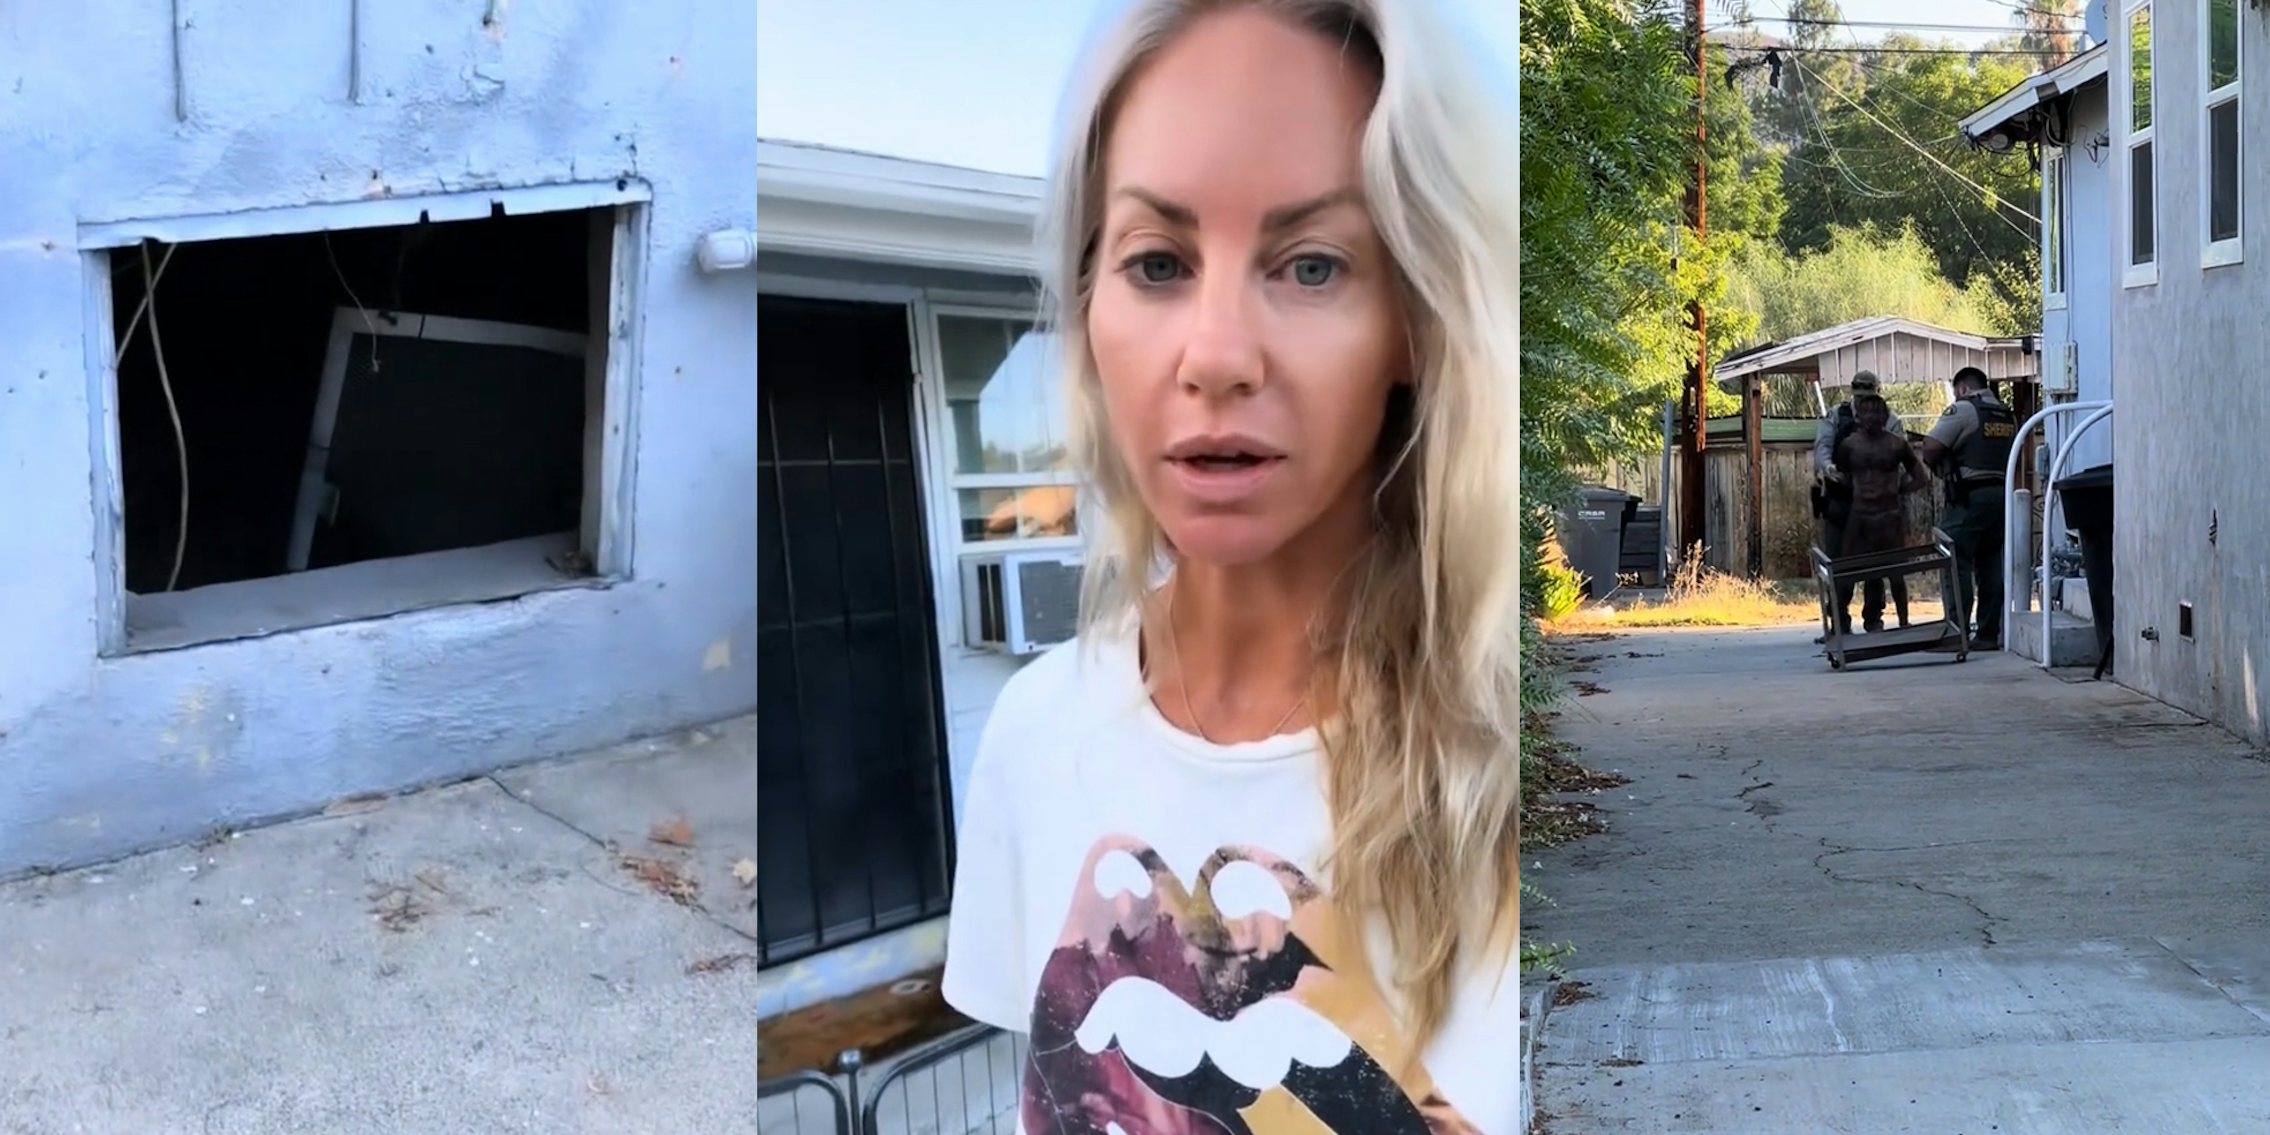 hole in house (l) woman speaking in front of house (c) police arresting man at house (r)